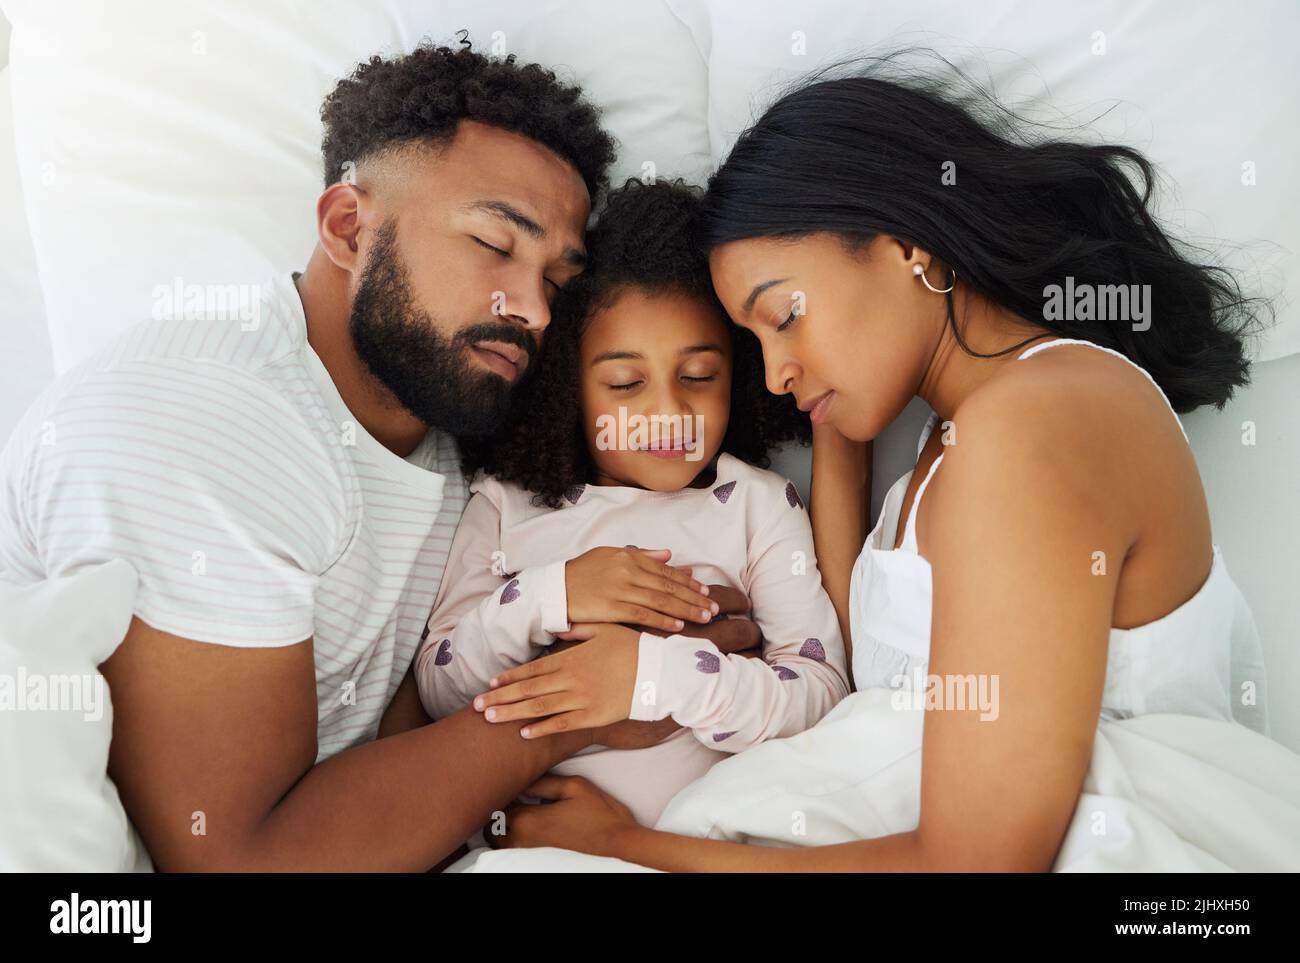 A nap a day keeps the exhaustion away. a young family taking a nap together at home. Stock Photo